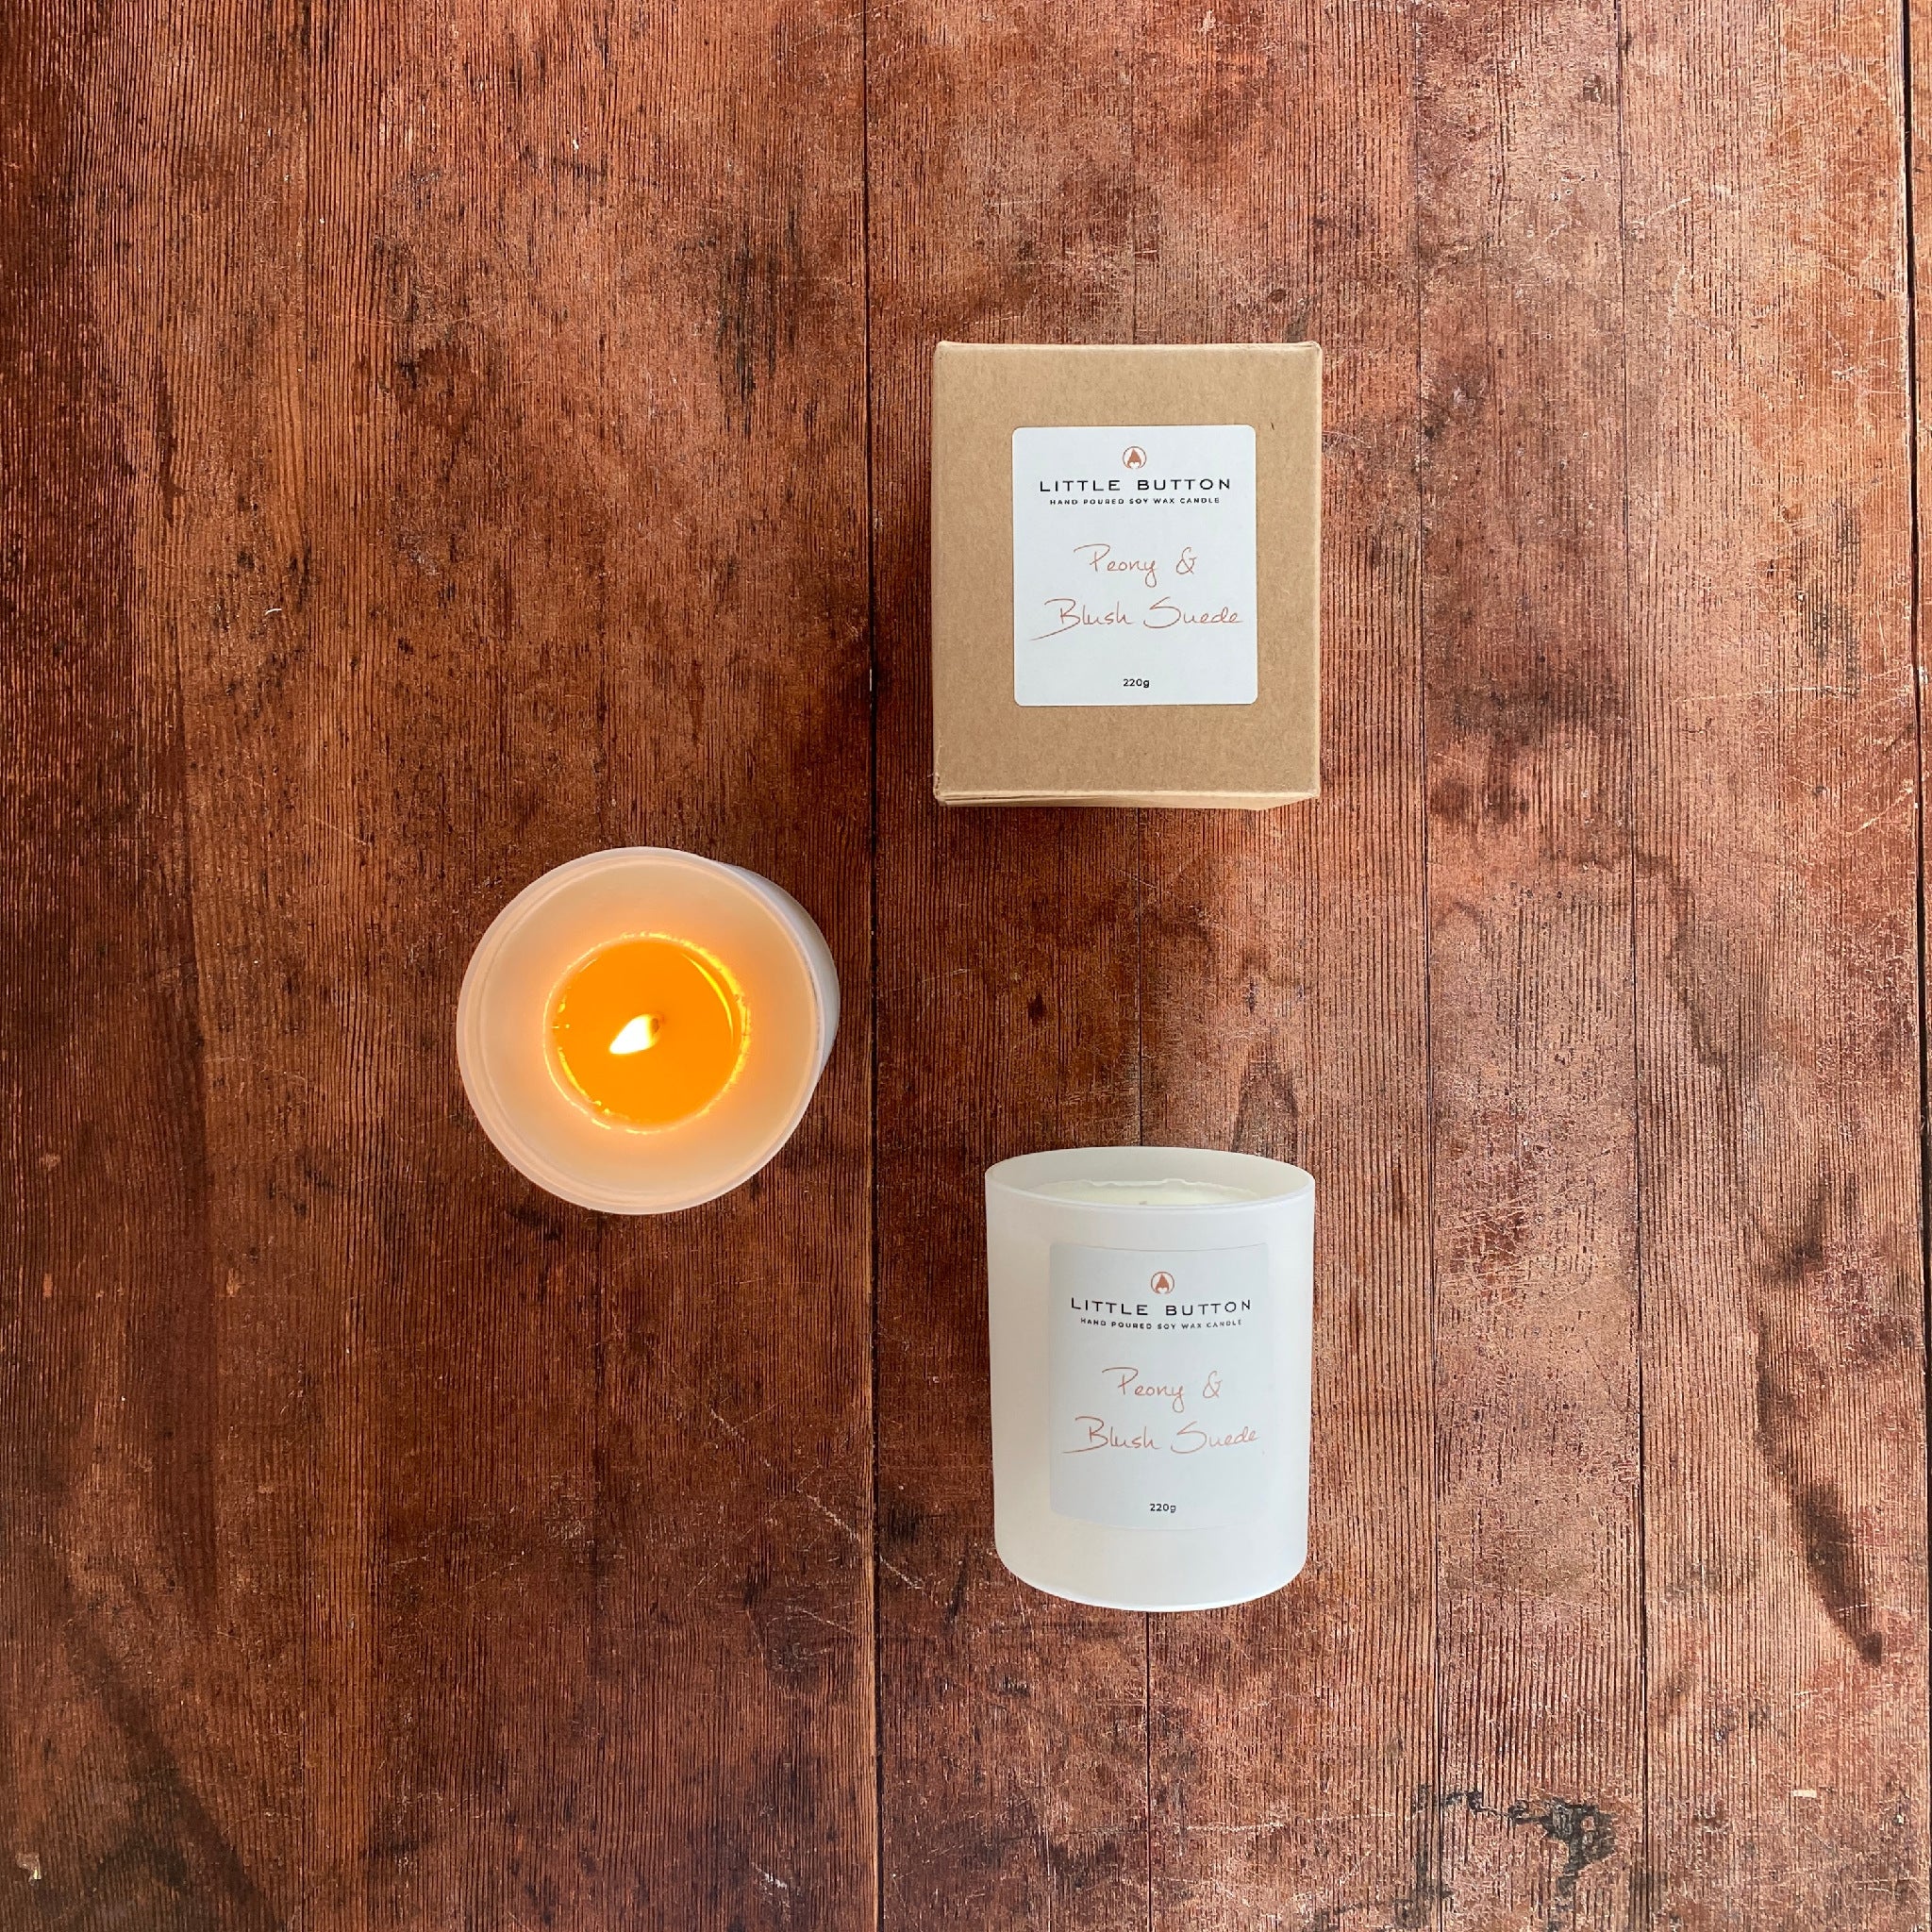 Peony & Blush Suede Soy Candle